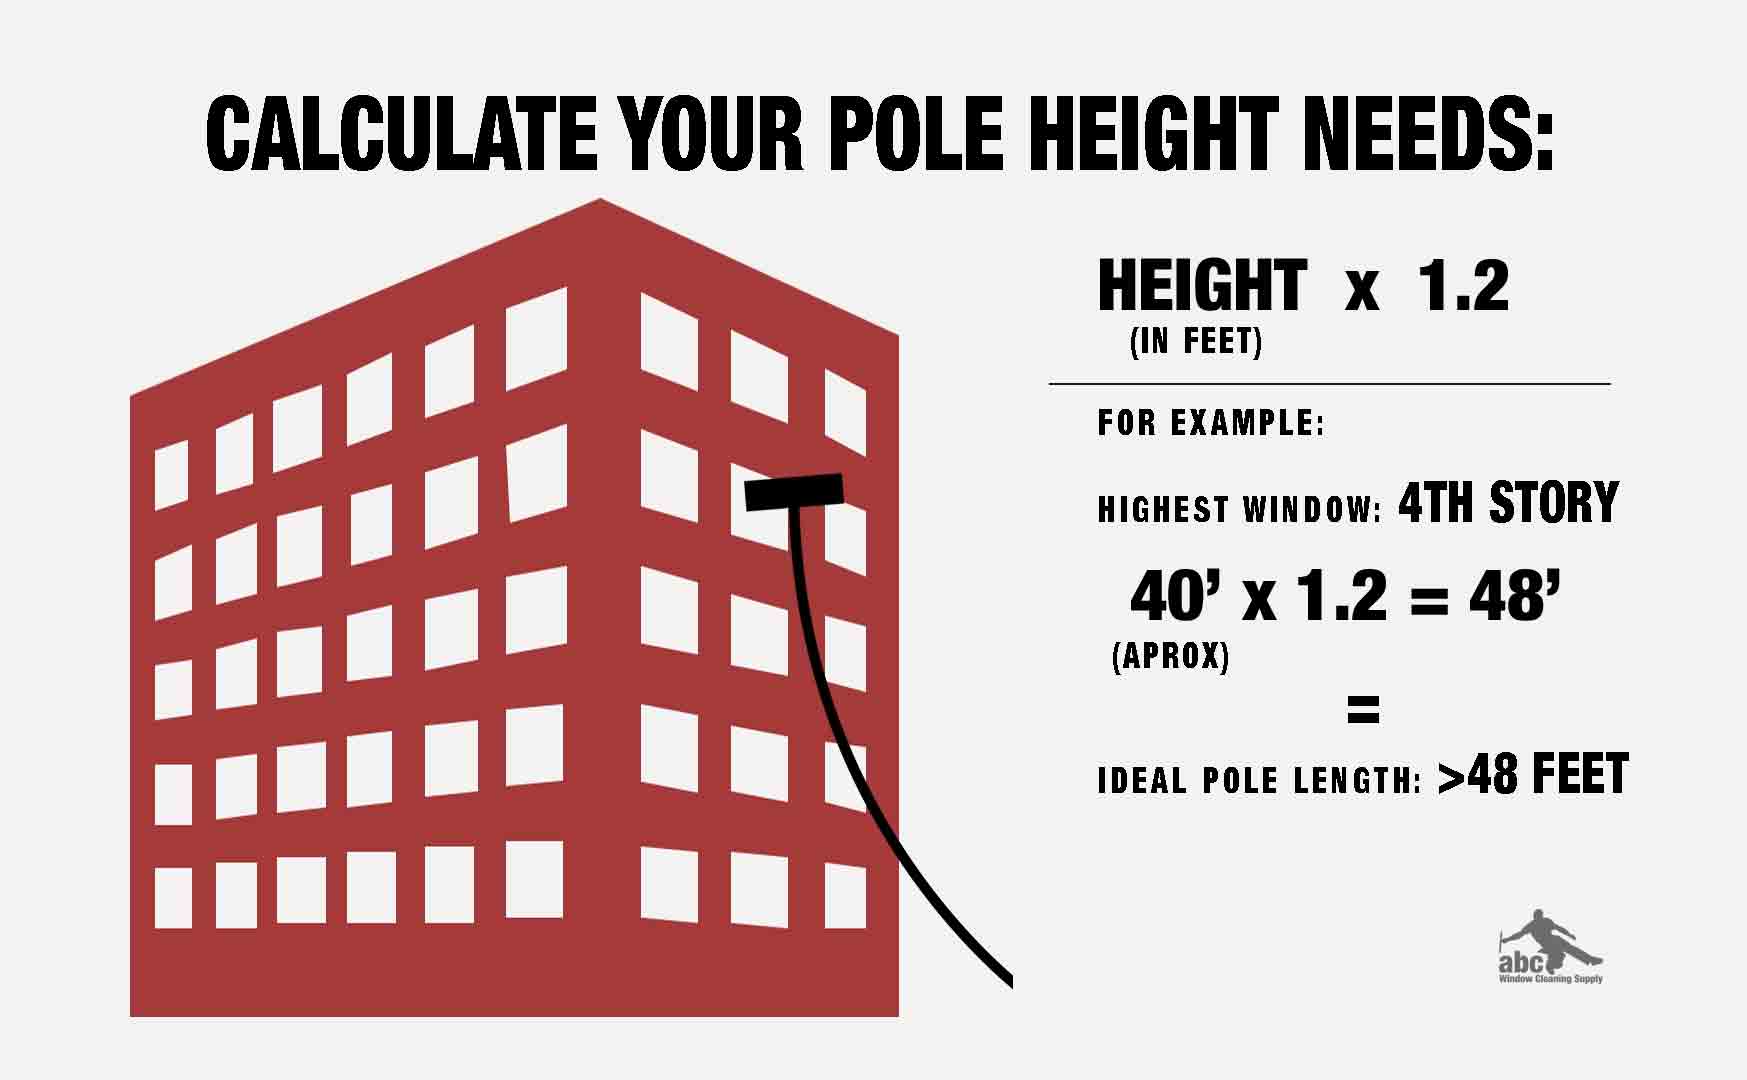 Calculating Your Pole Height Needs